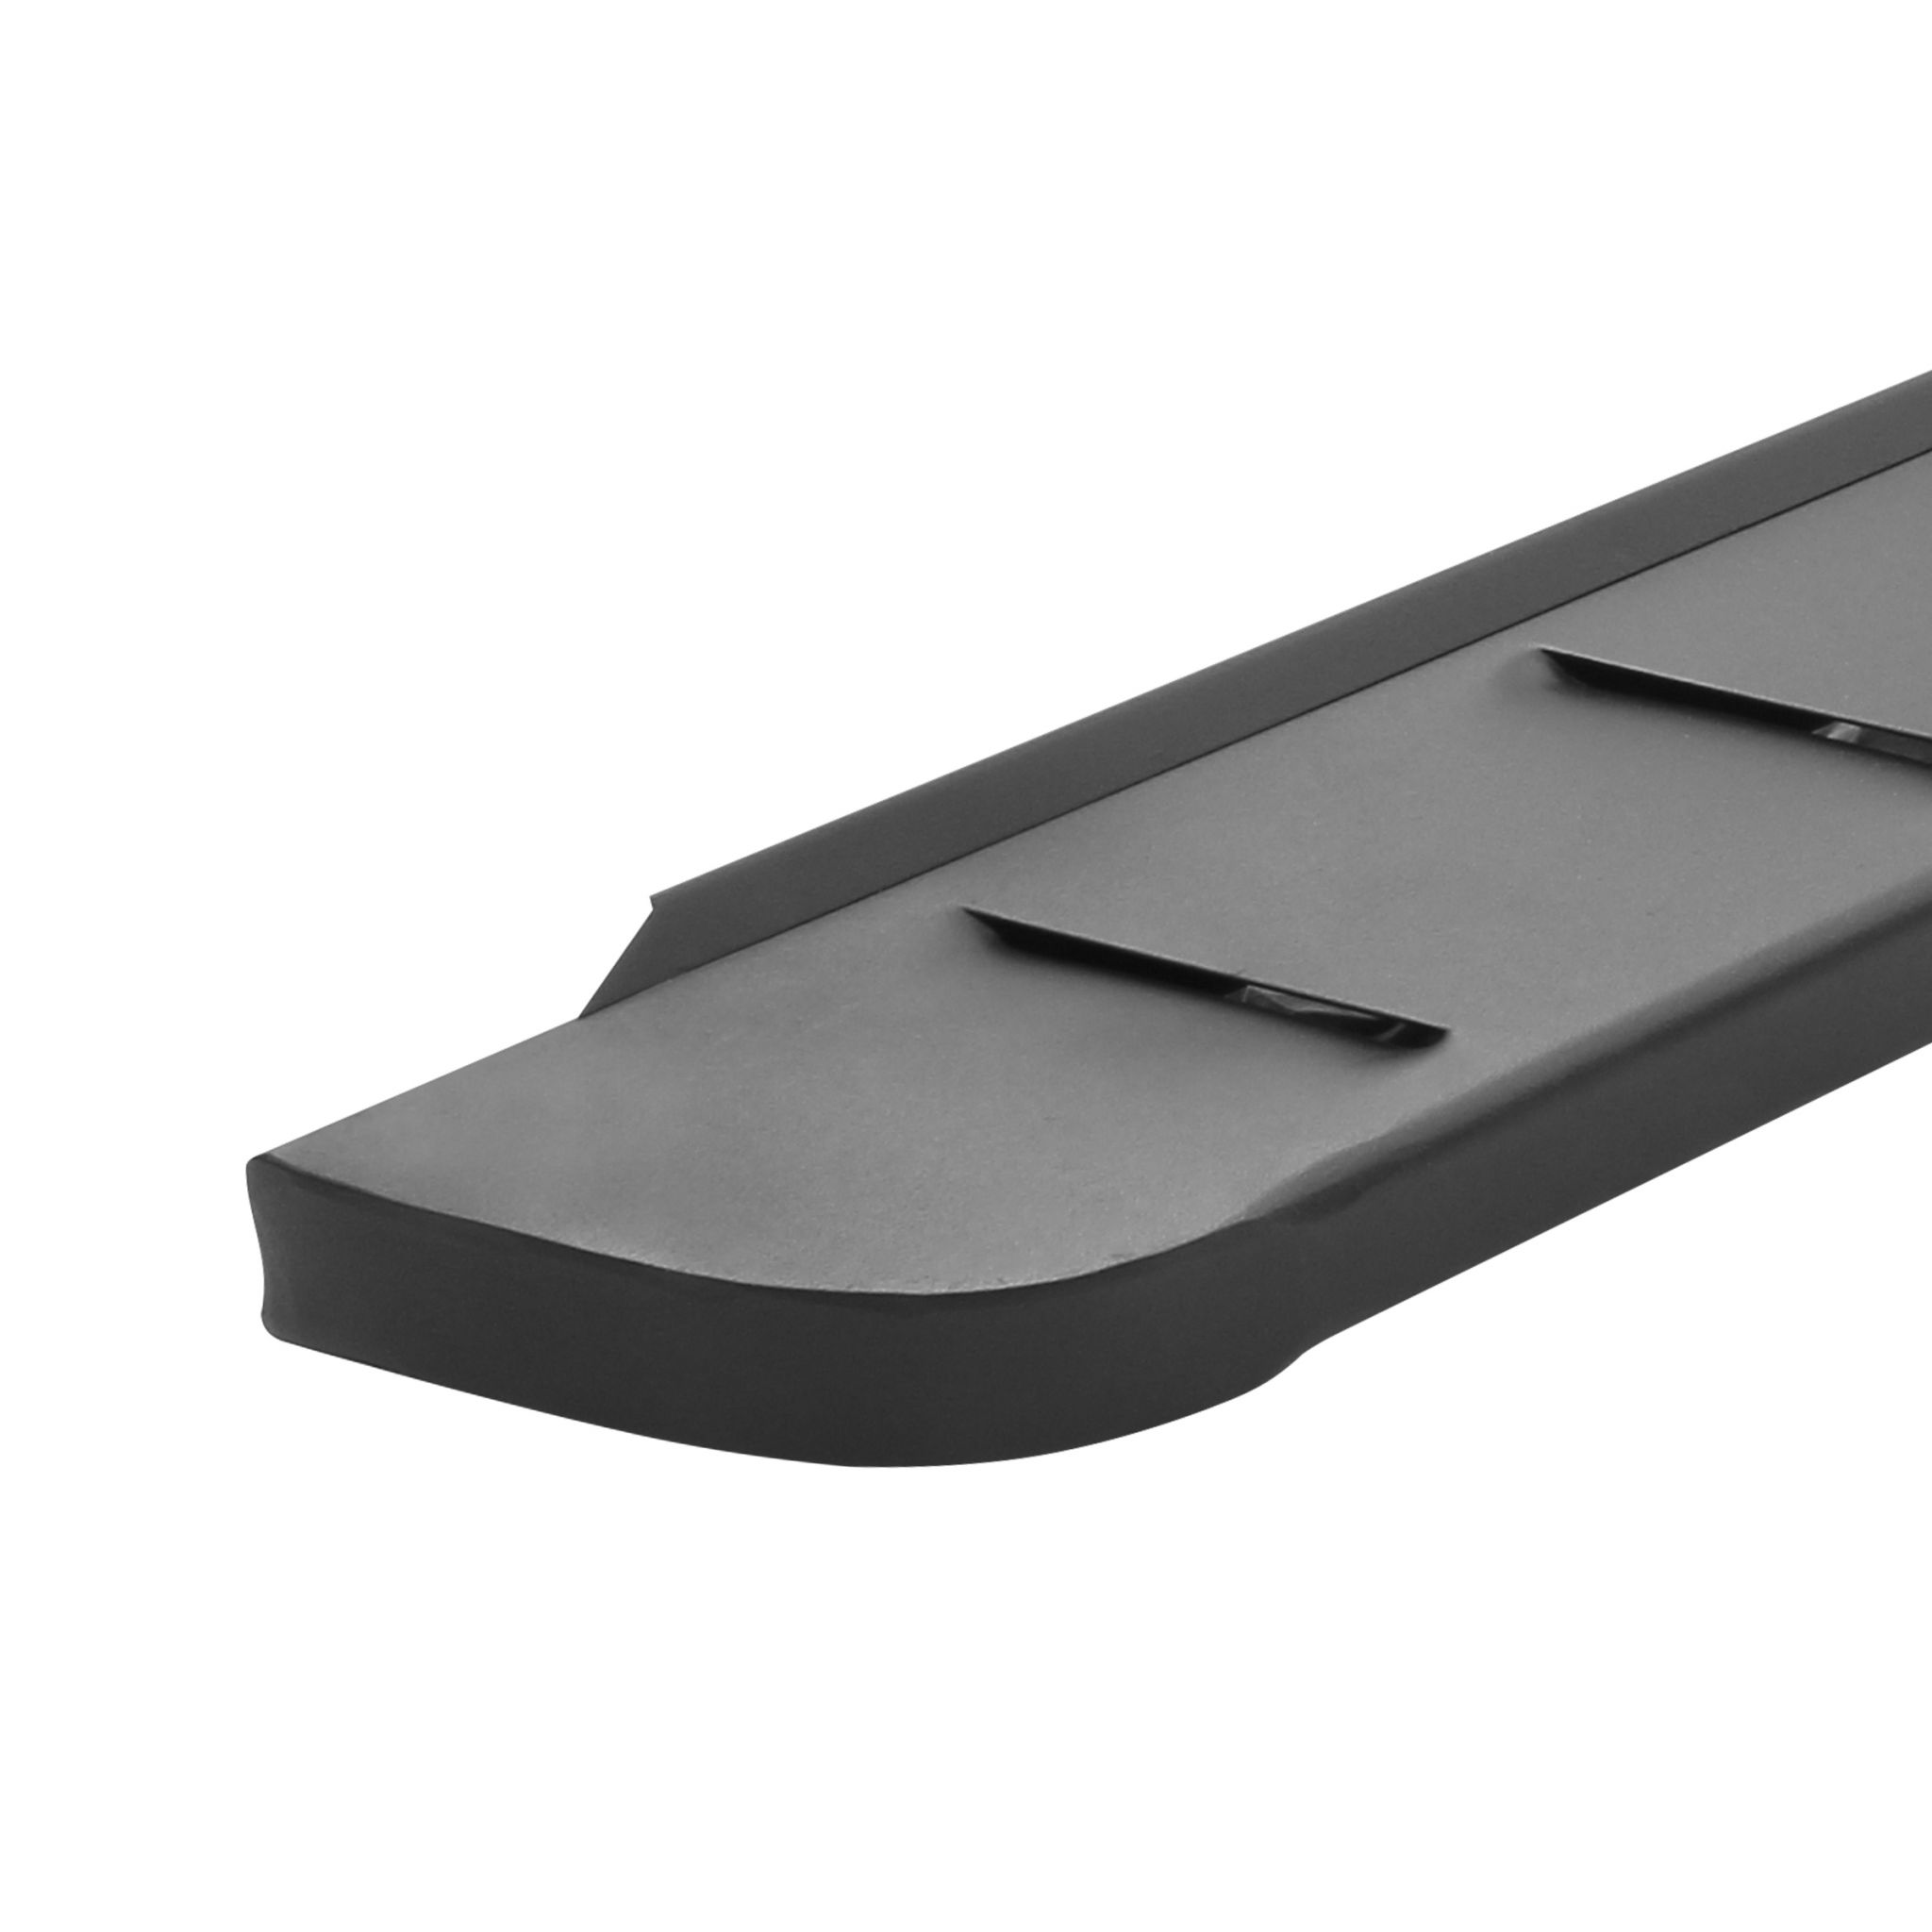 Go Rhino - 63415587PC - RB10 Running Boards With Mounting Brackets - Textured Black